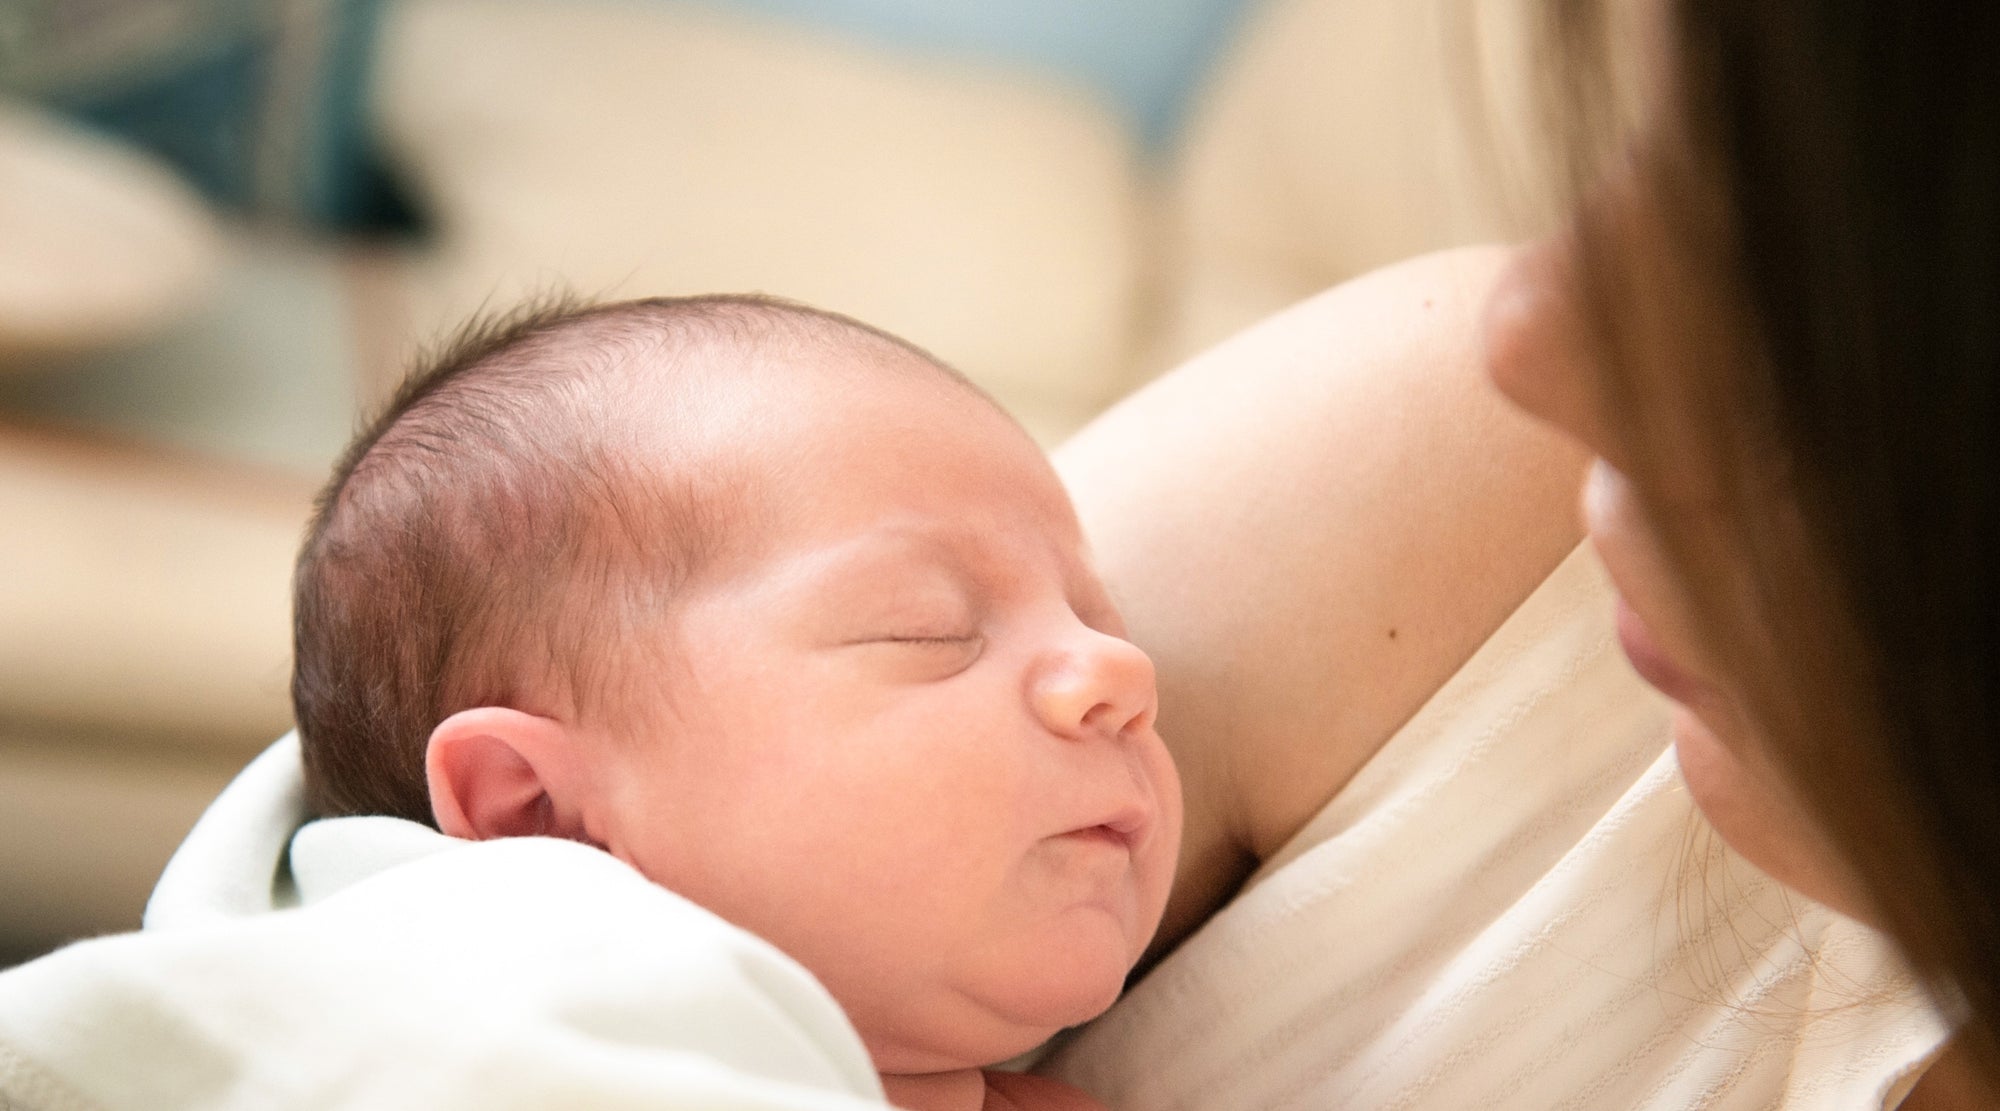 Bringing home a newborn without support